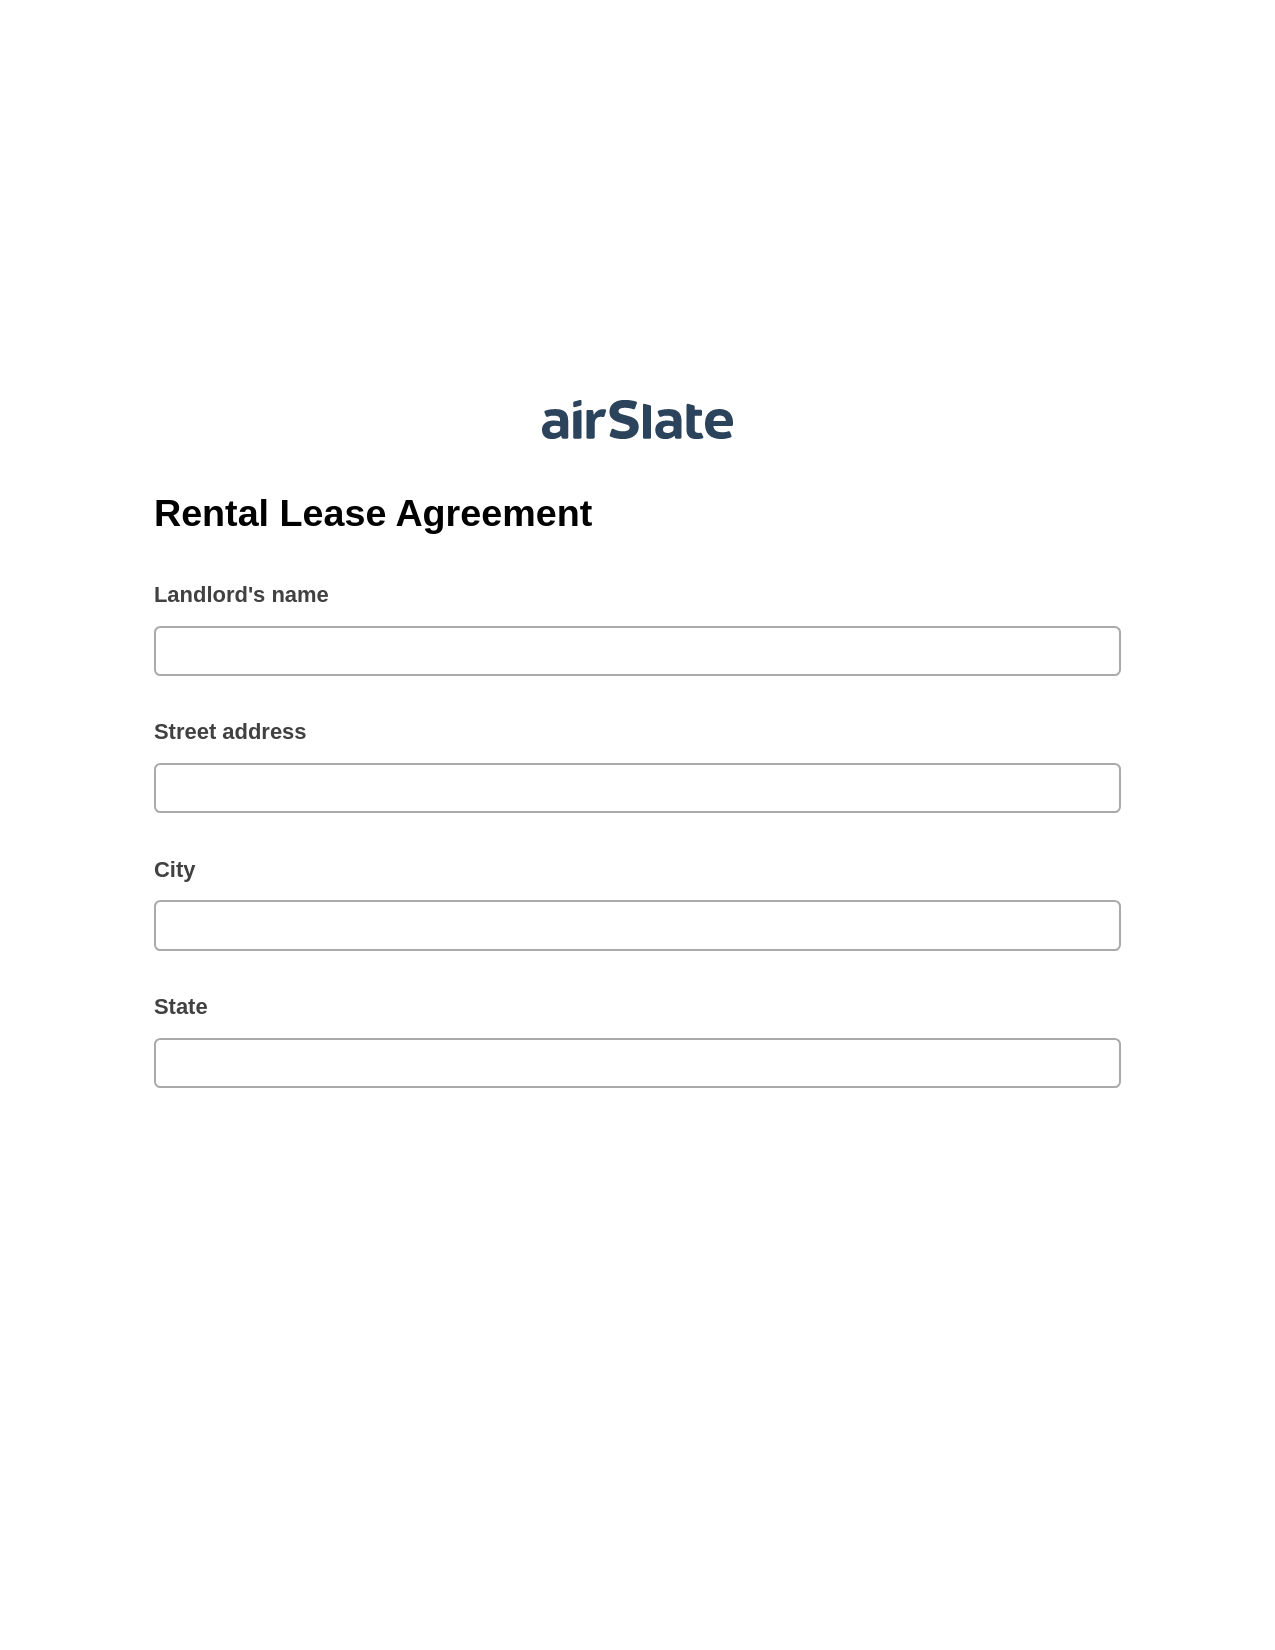 Rental Lease Agreement Pre-fill from CSV File Bot, Document Hide Bot, Post-finish Document Bot